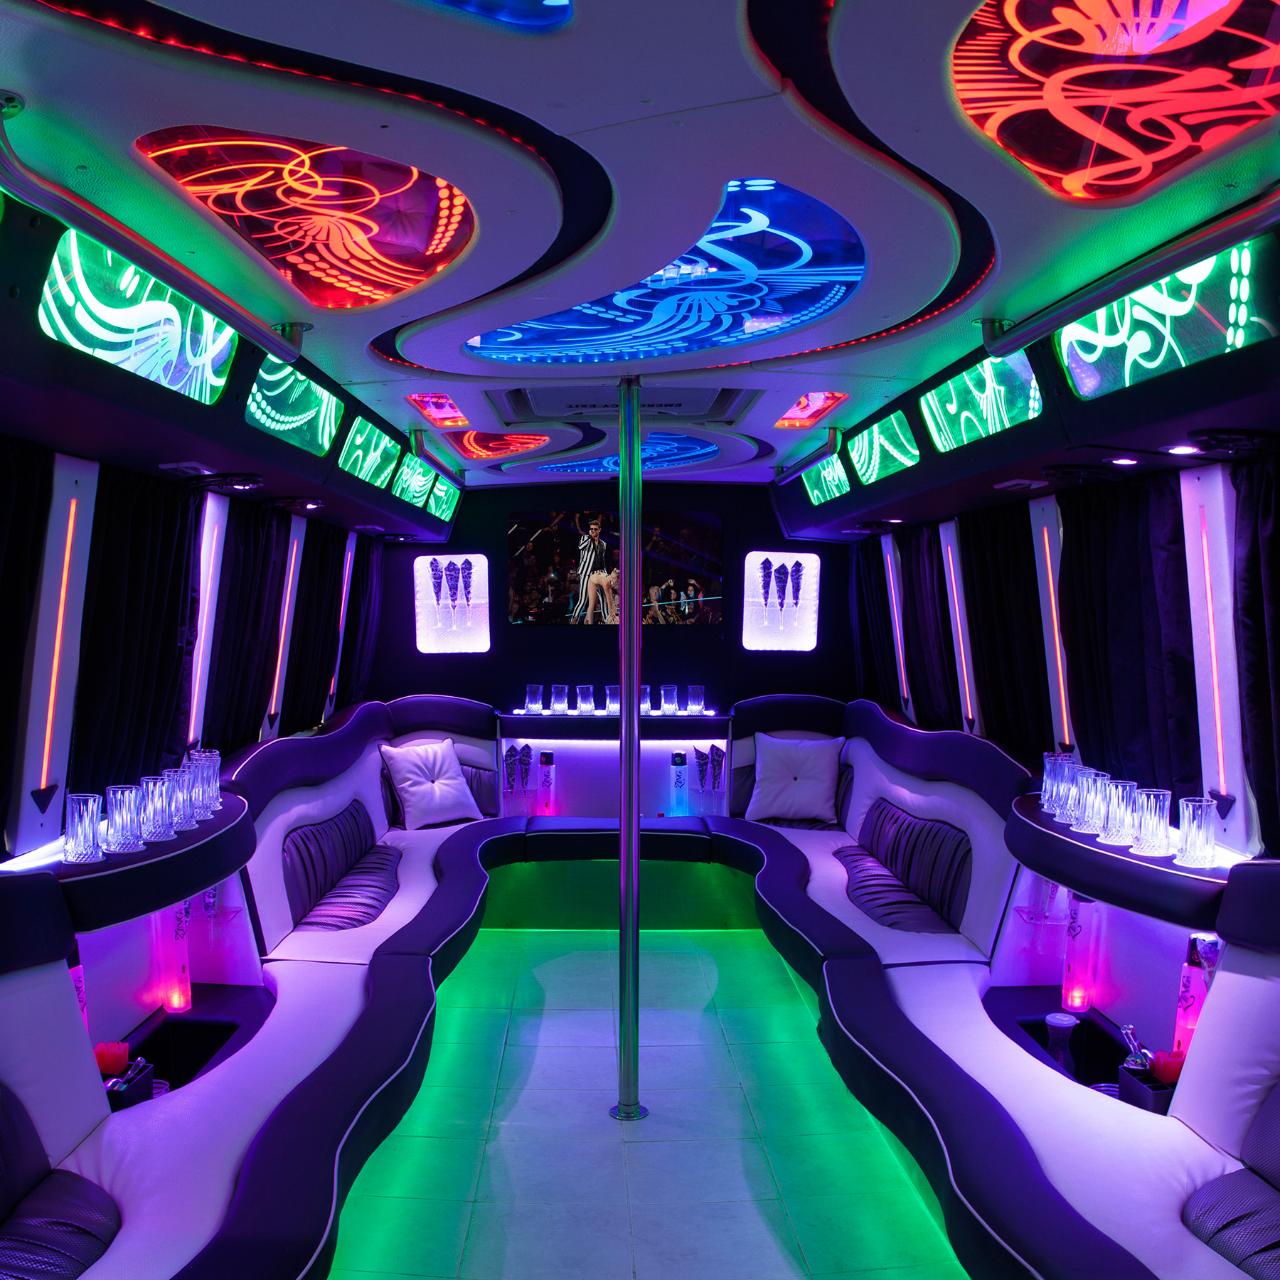 24-25 PASSENGER PARTY BUS - Hourly Charter